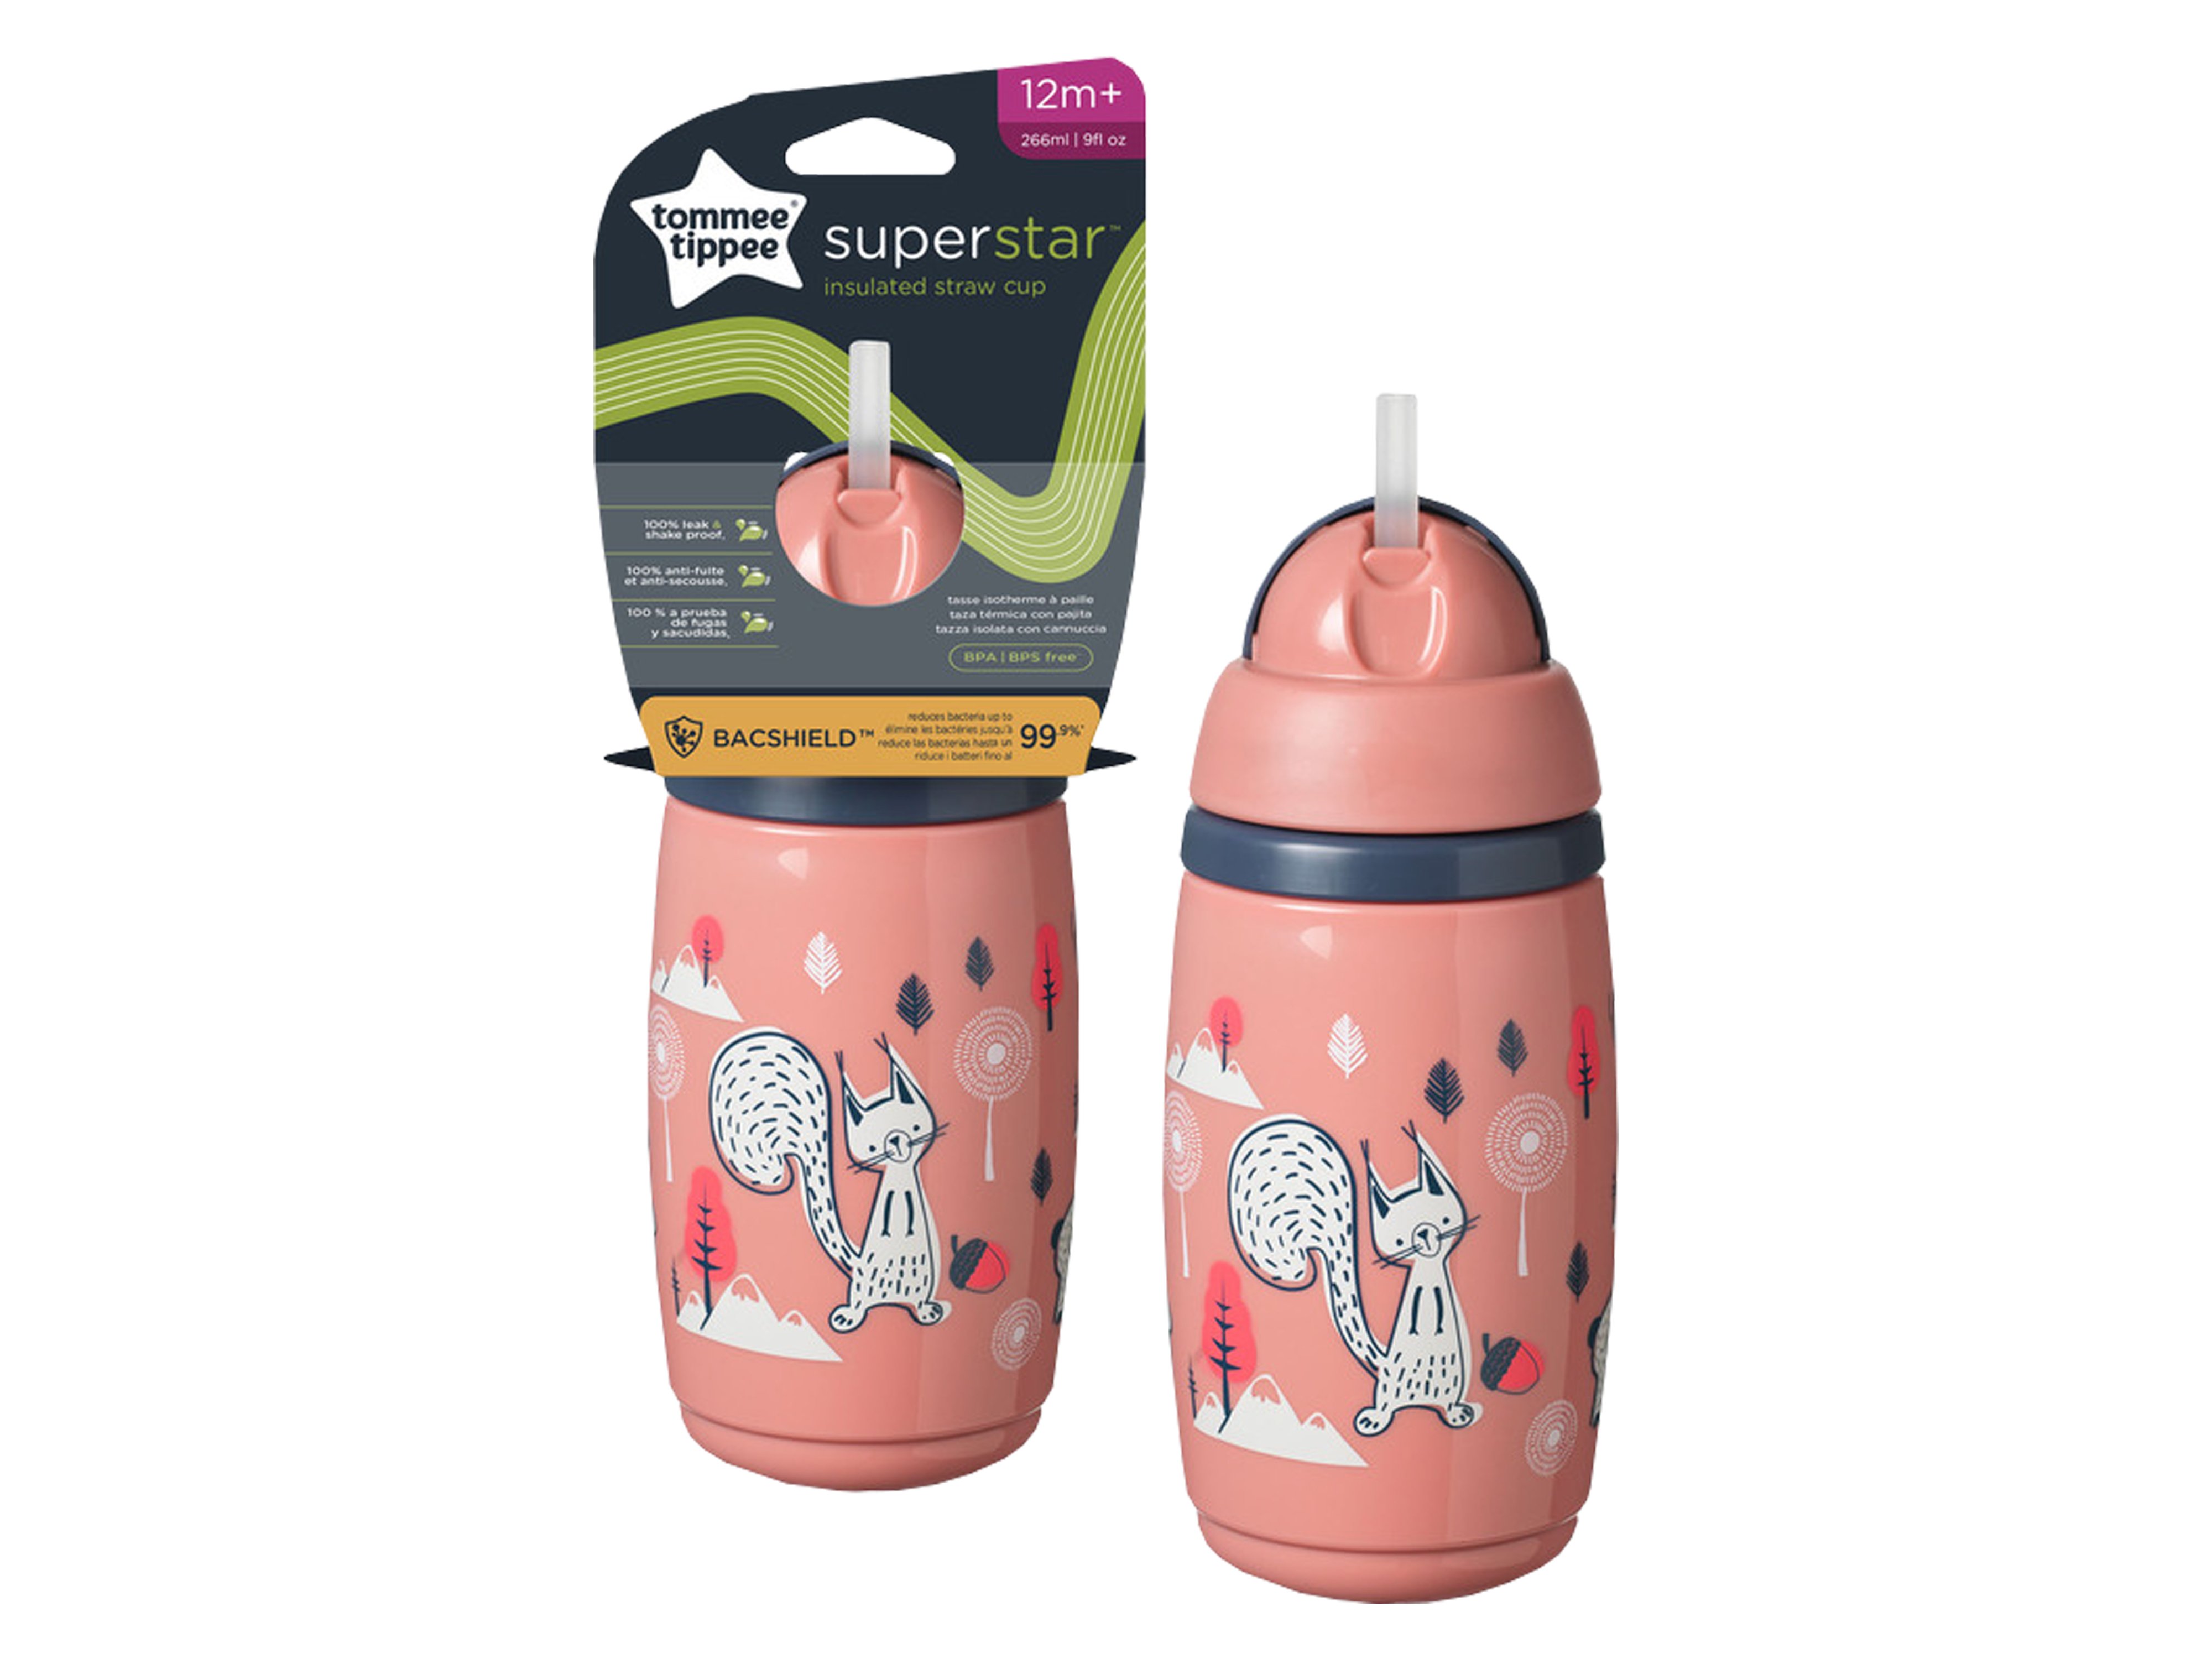 Tommee Tippee Superstar Insulated Straw Cup 12md+, rosa, 1 stk.